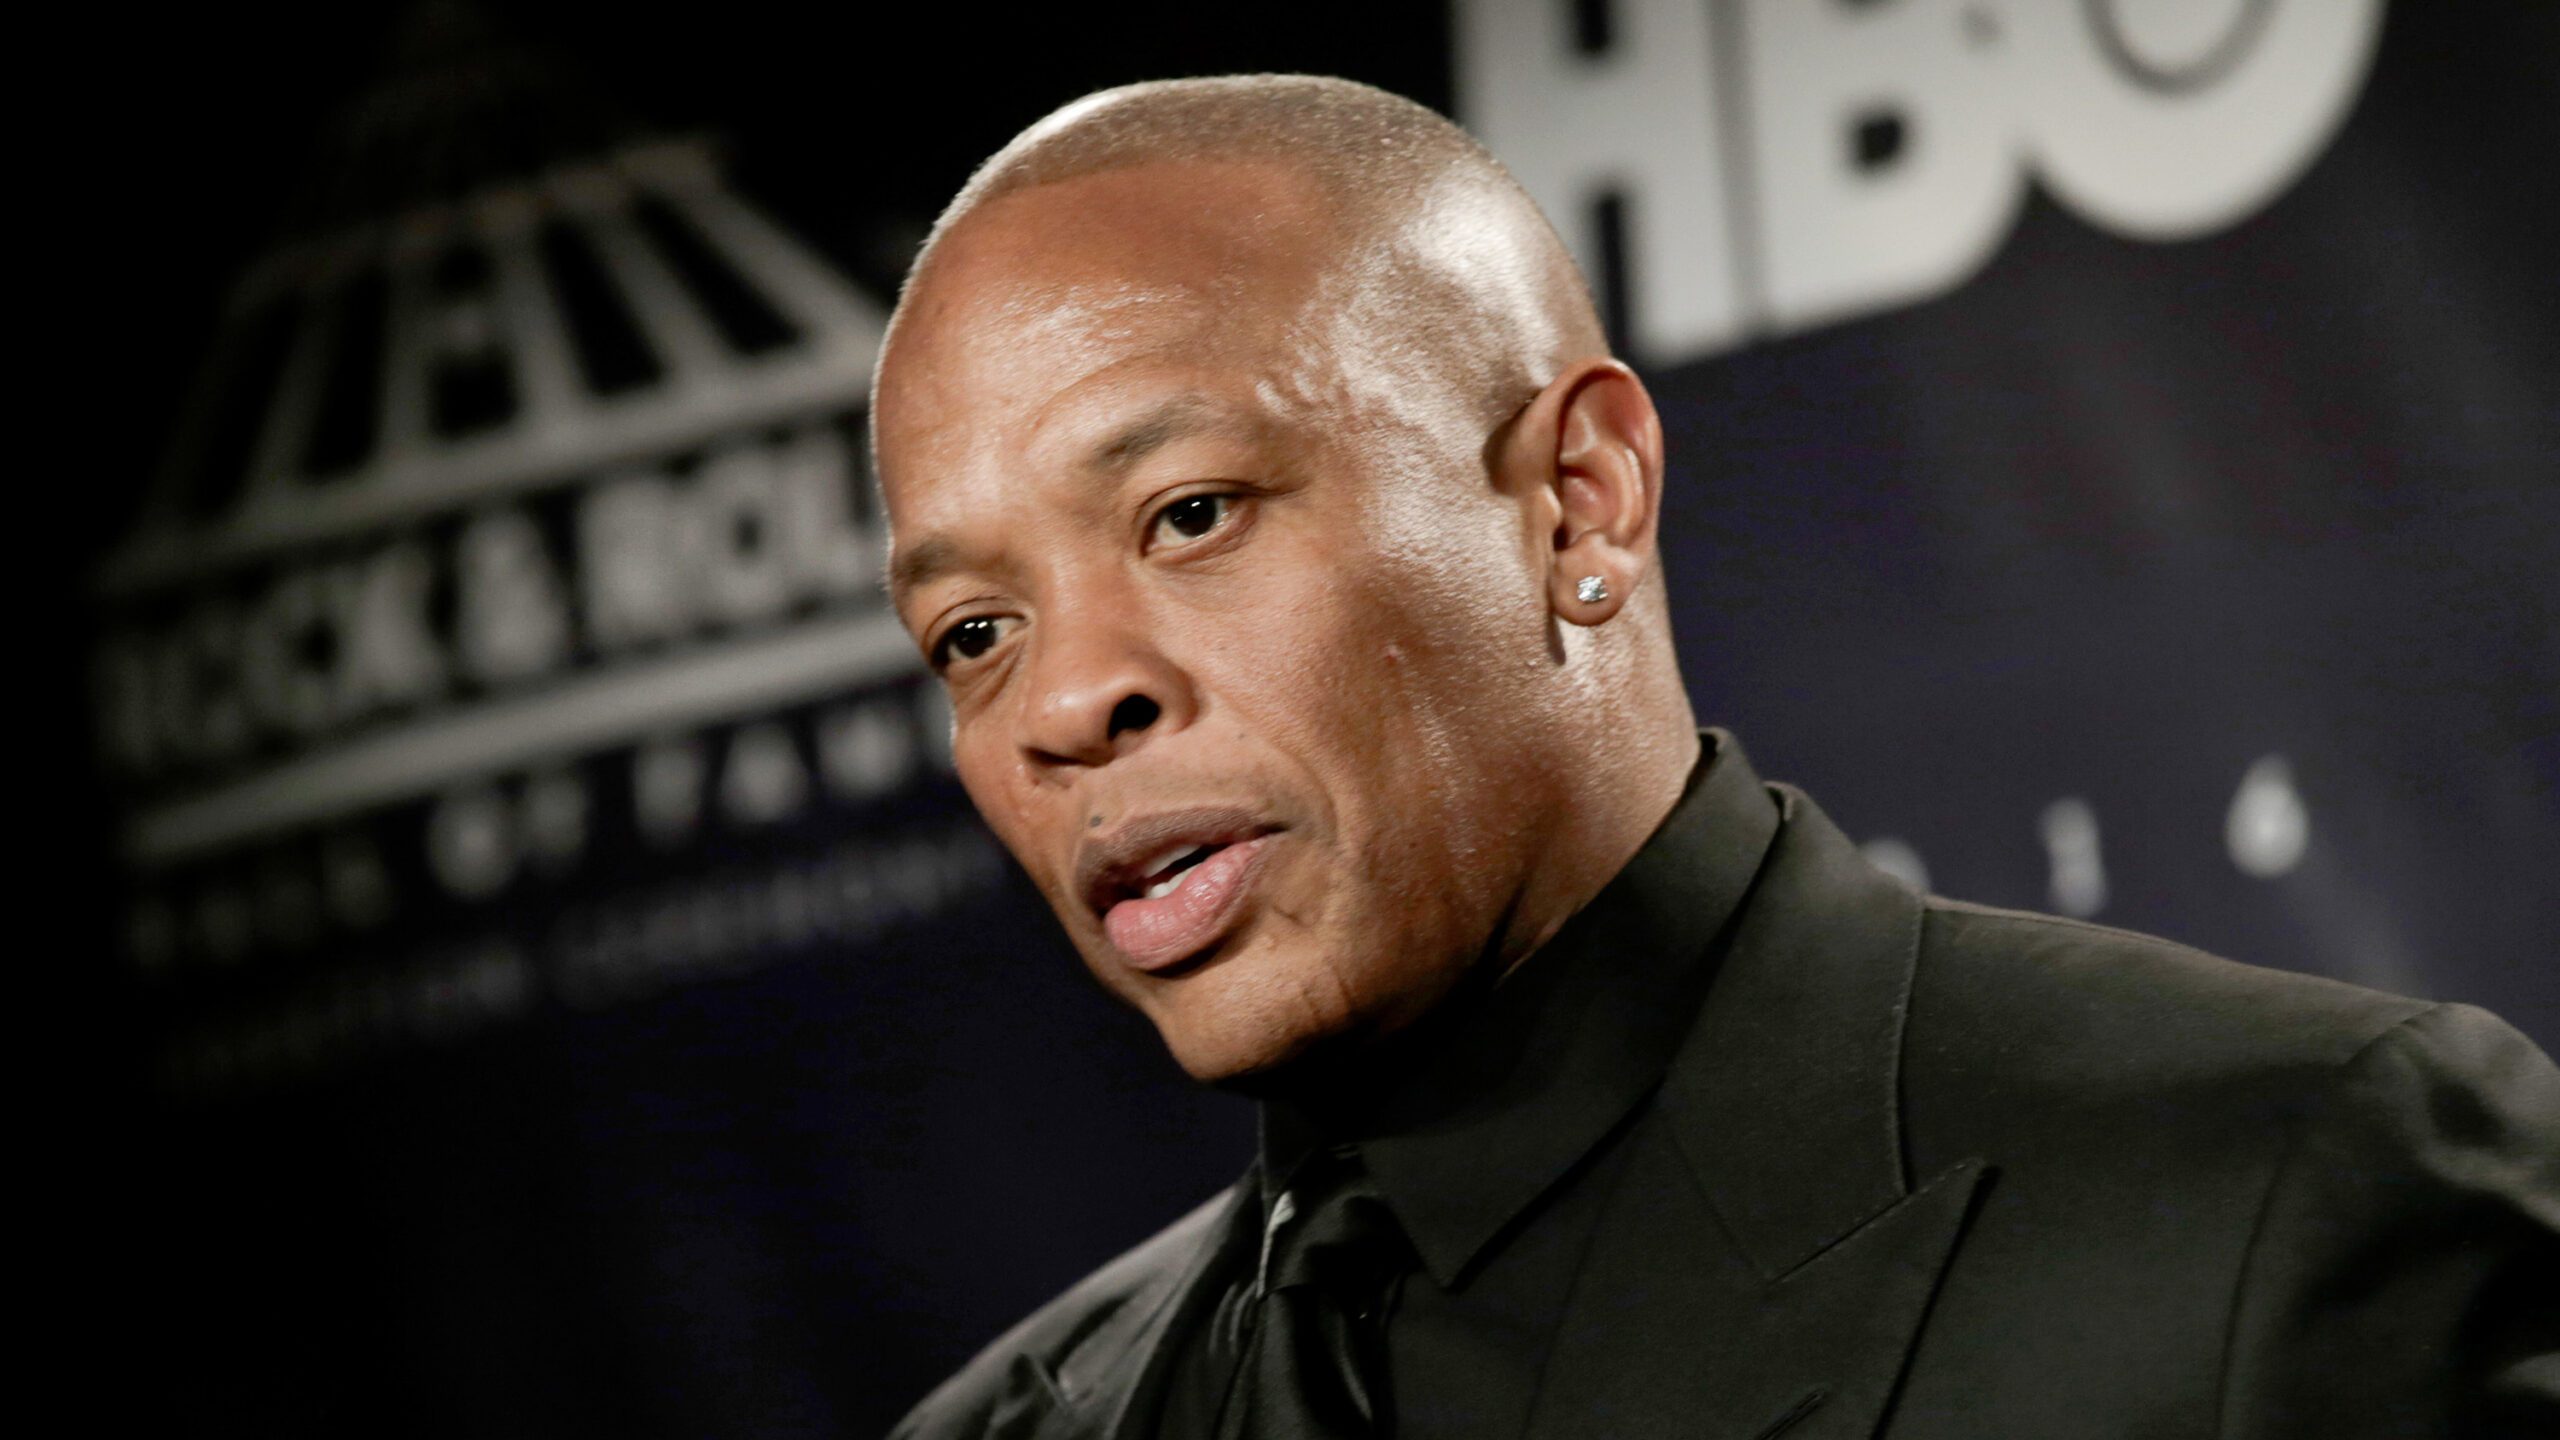 Rap tycoon Dr Dre handcuffed outside home